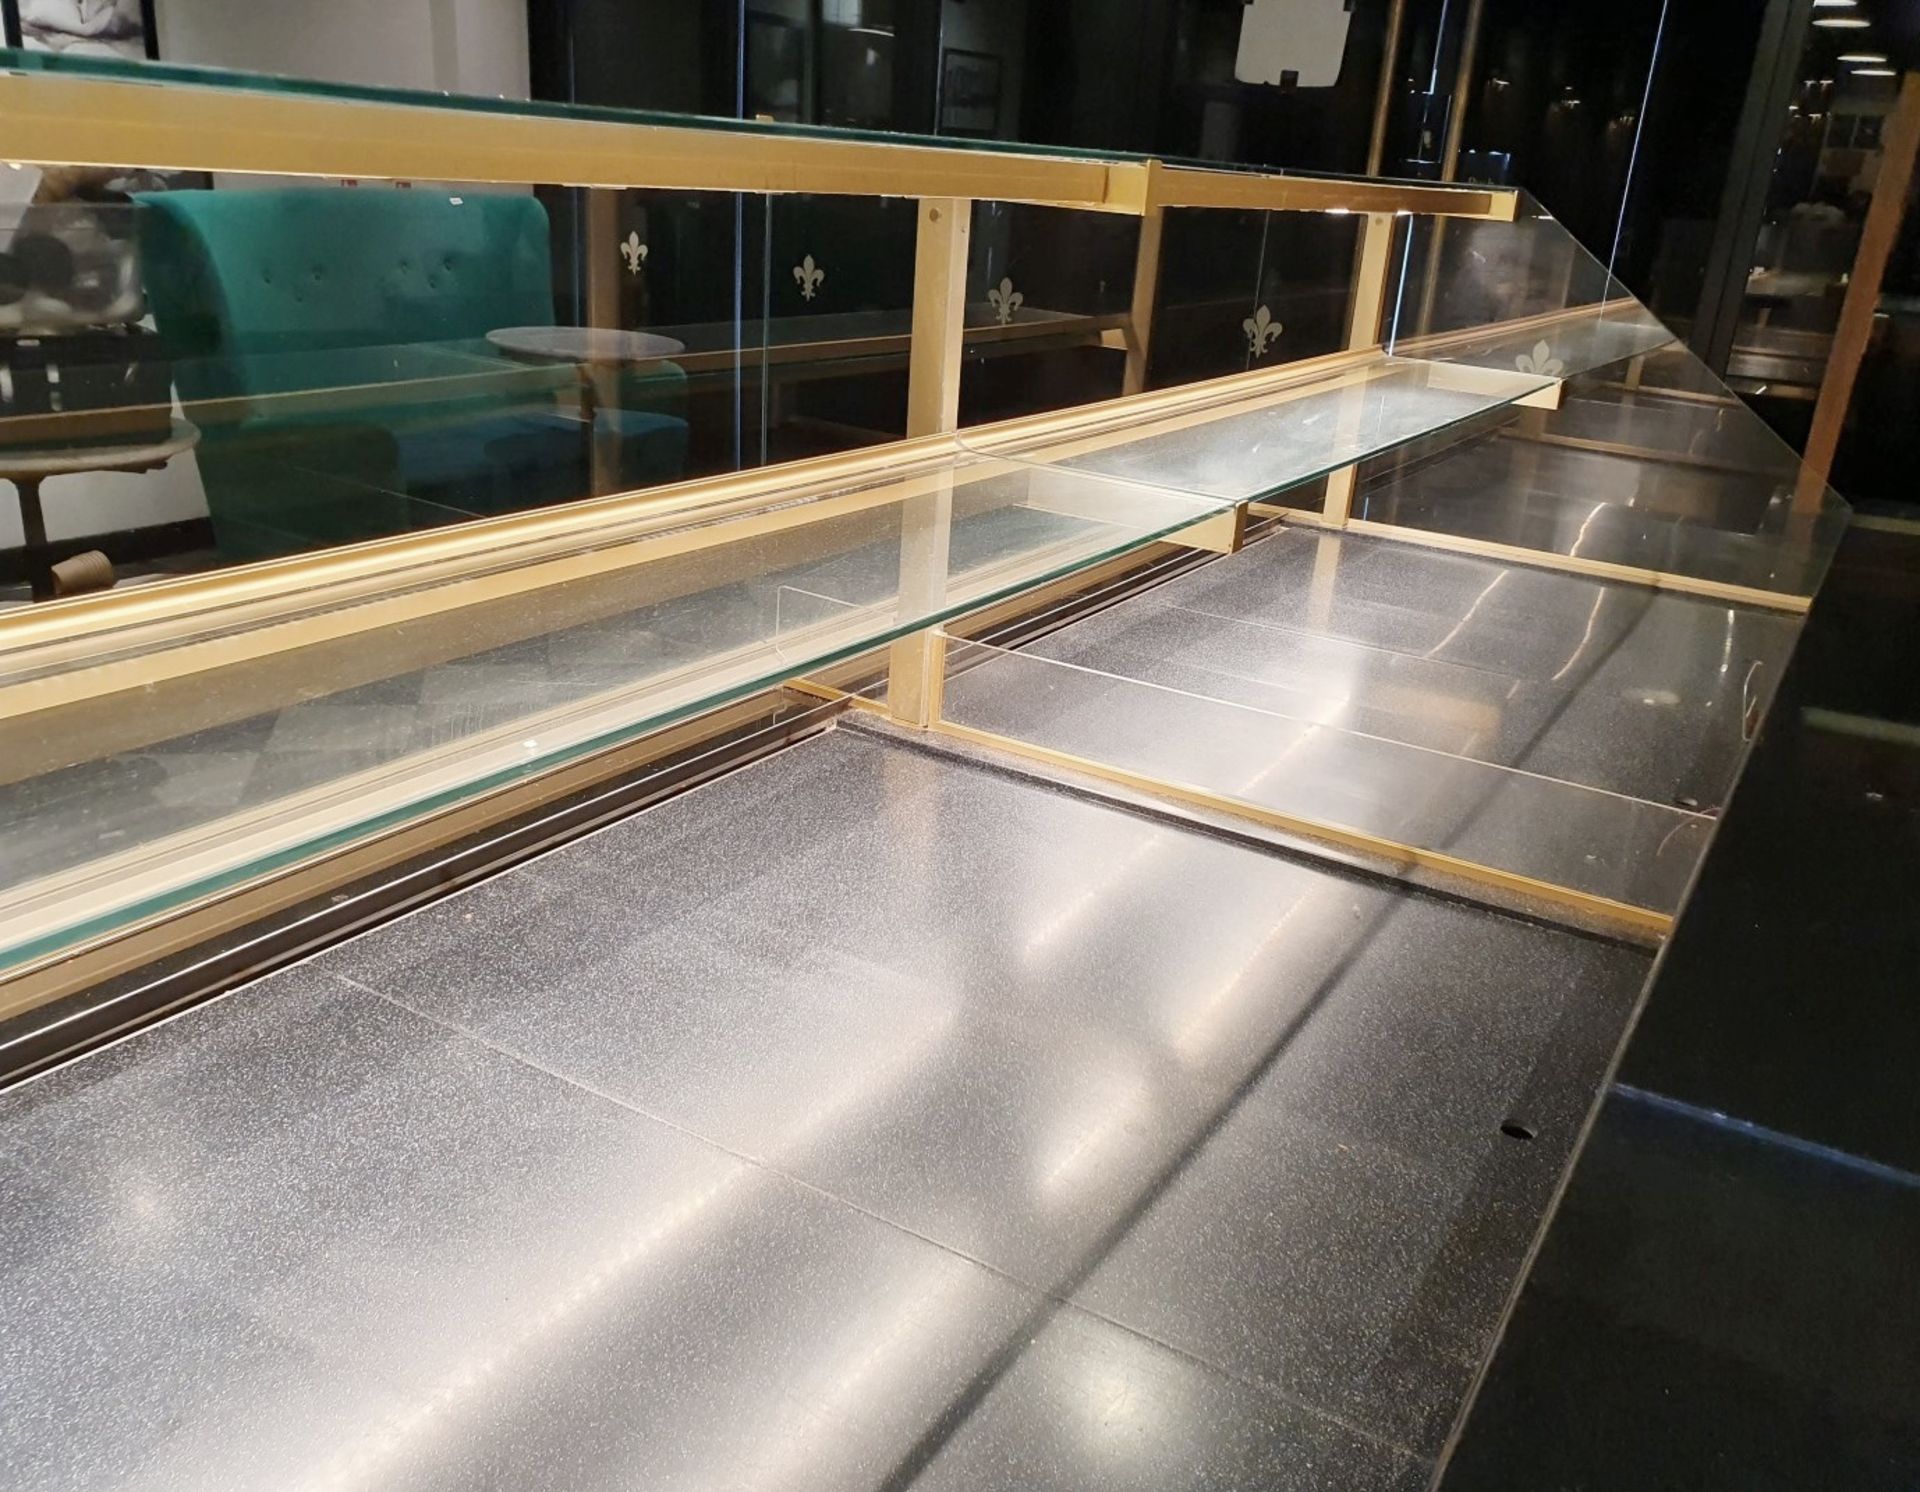 1 x Patisserie Refrigerated Display Service Counter in Oak and Gold With Granite Worktops and - Image 10 of 25